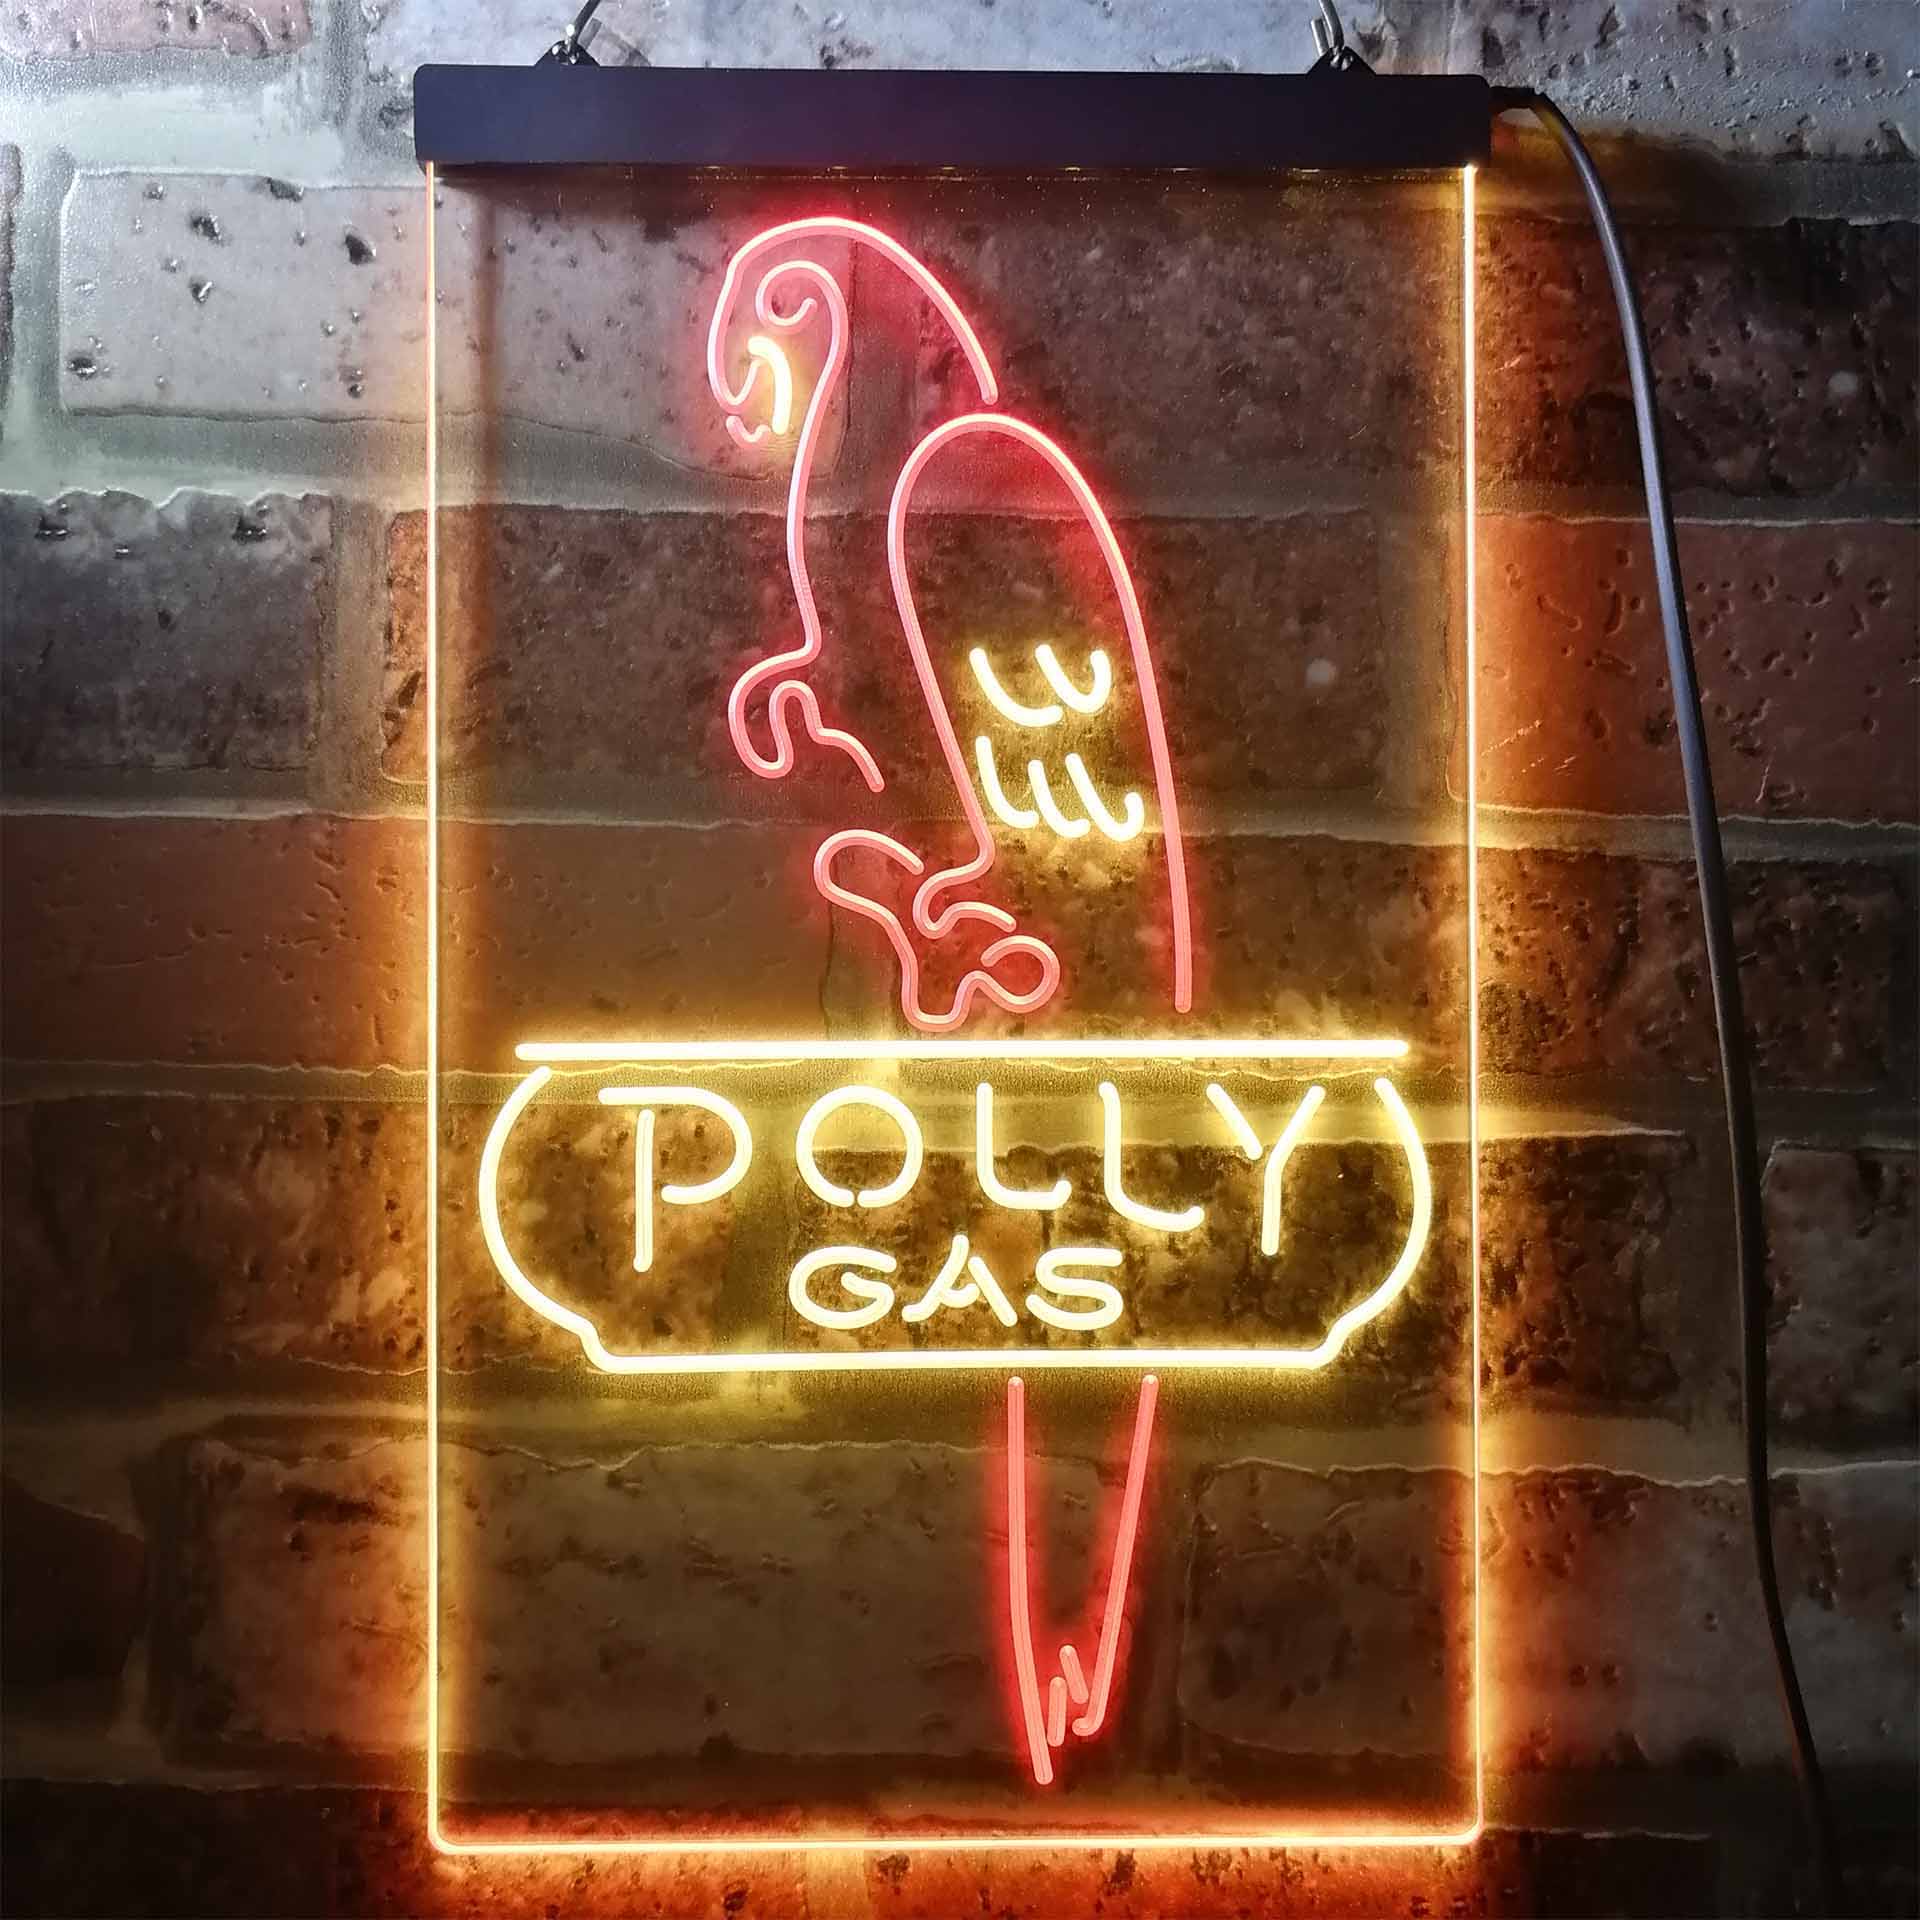 Polly Gas Parrot Neon-Like LED Sign